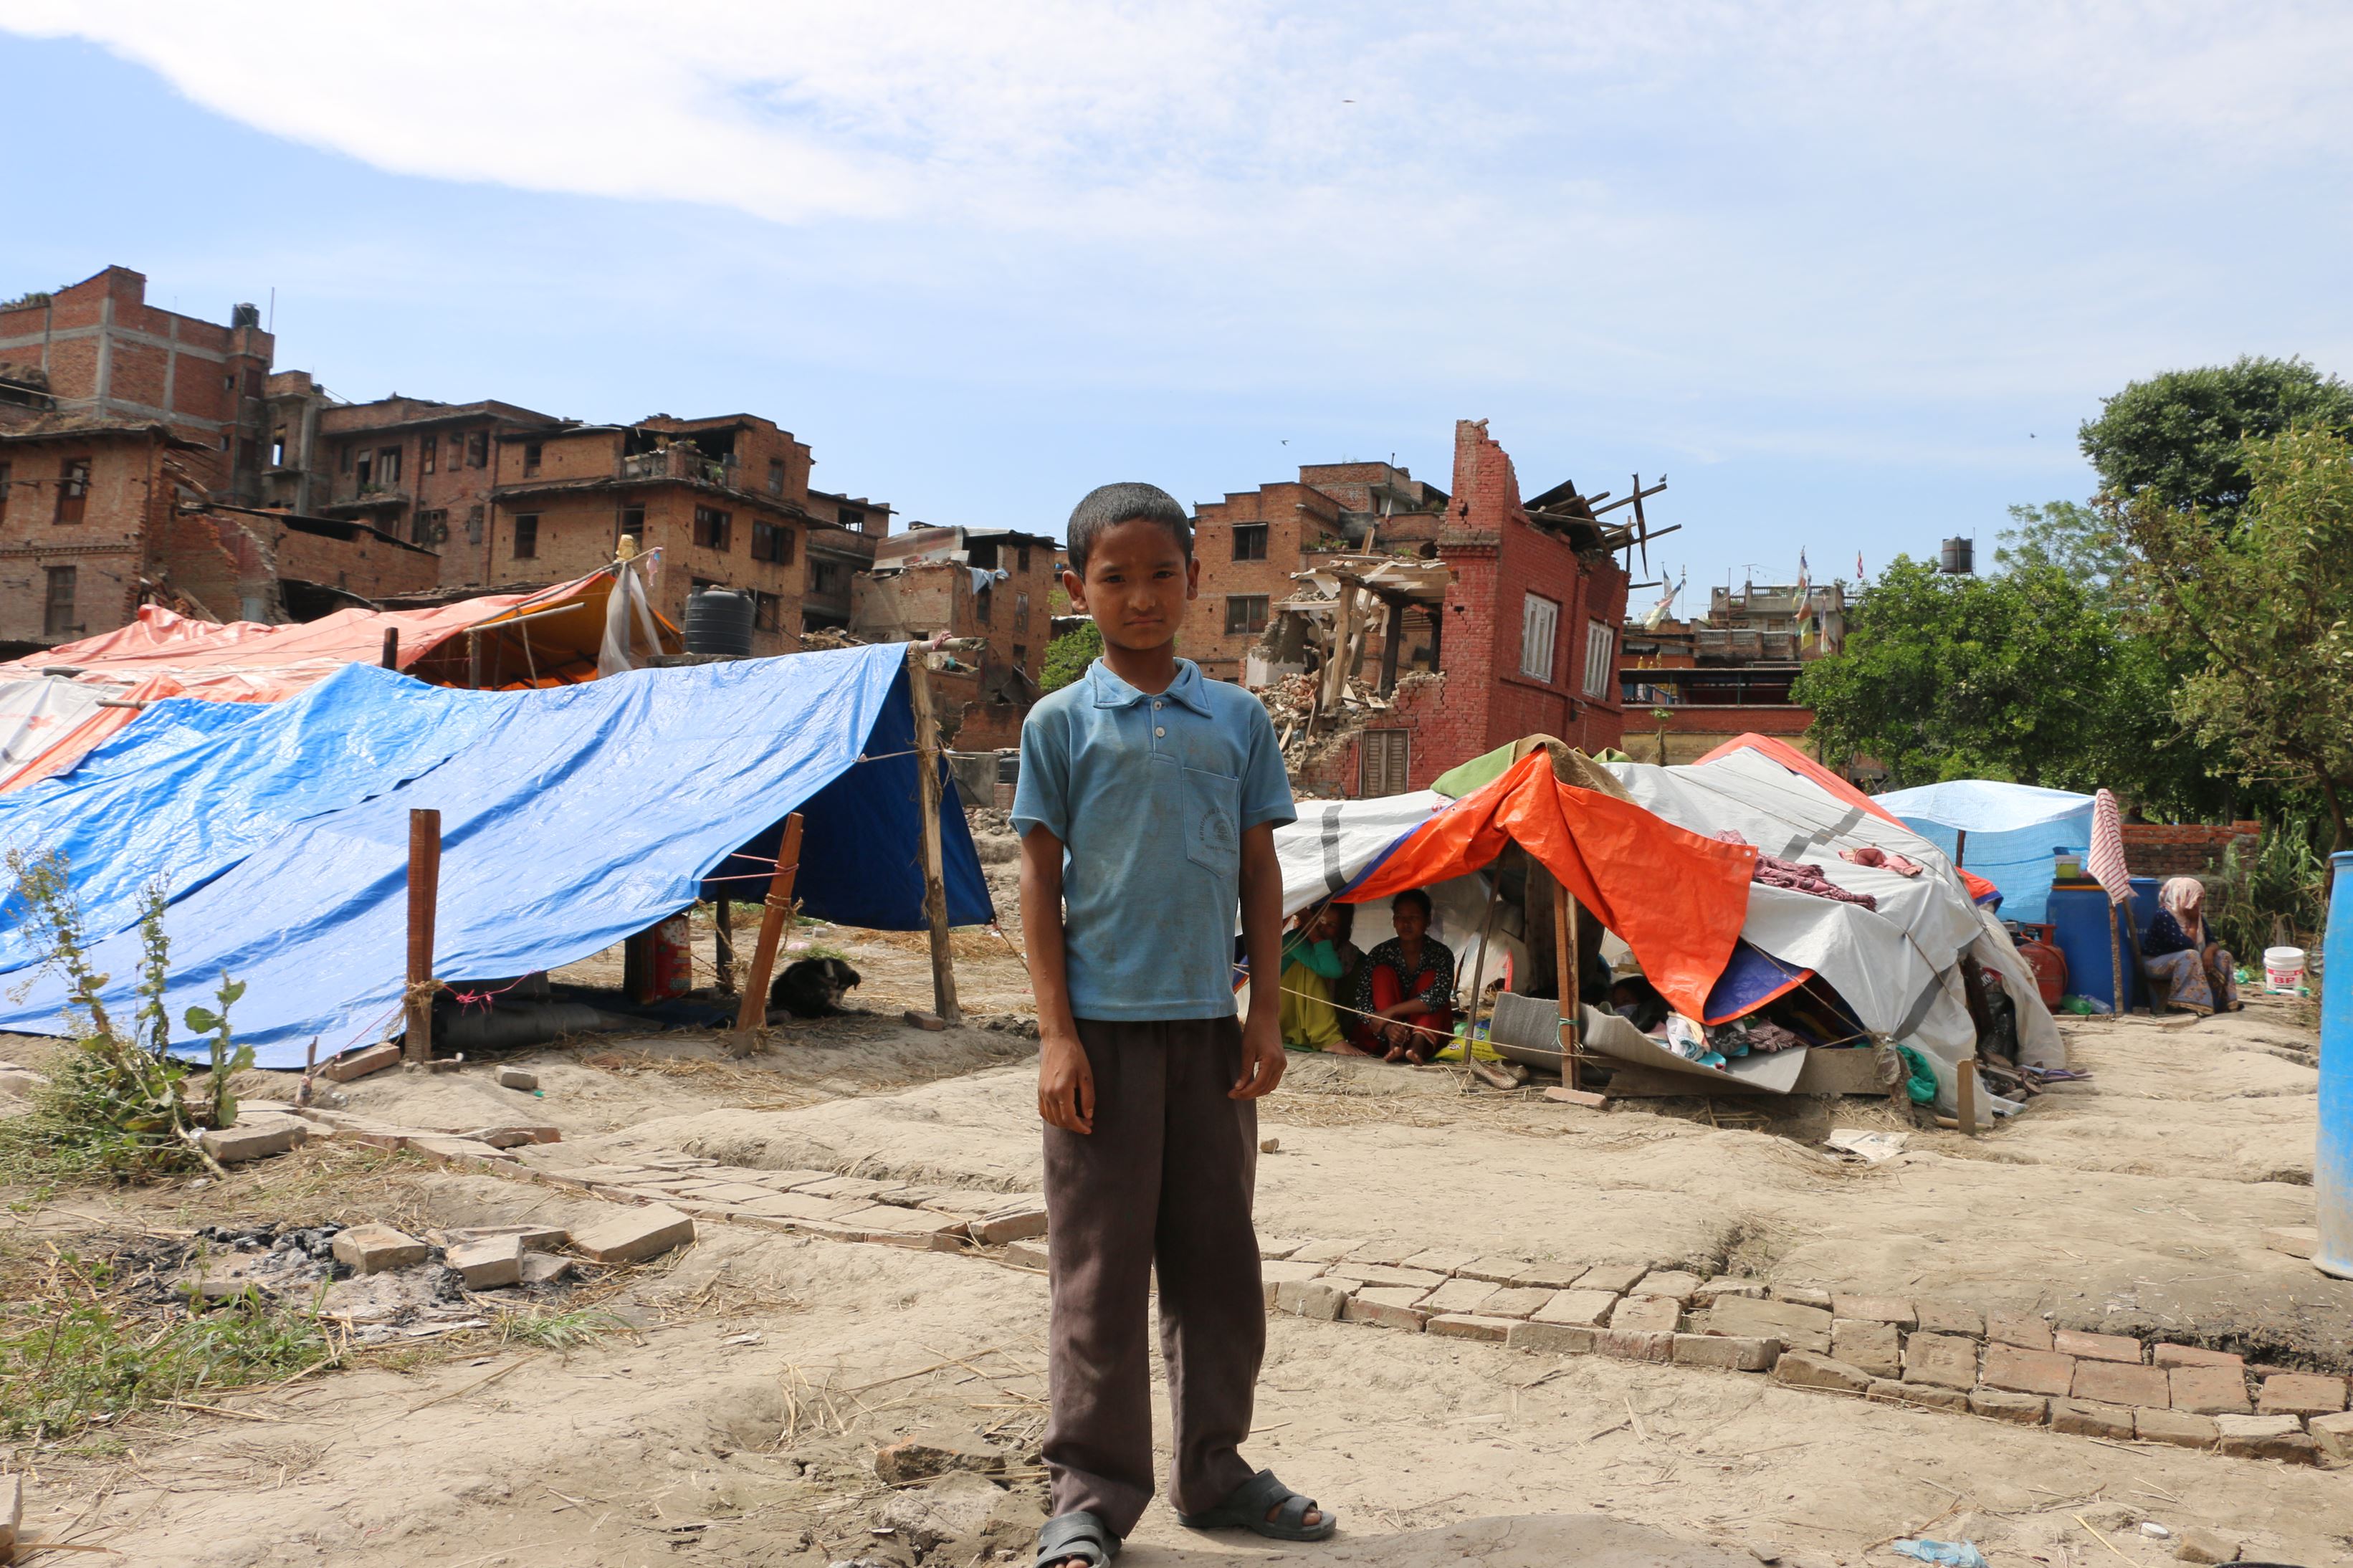 Boy in front of aftermath of earthquake in Nepal